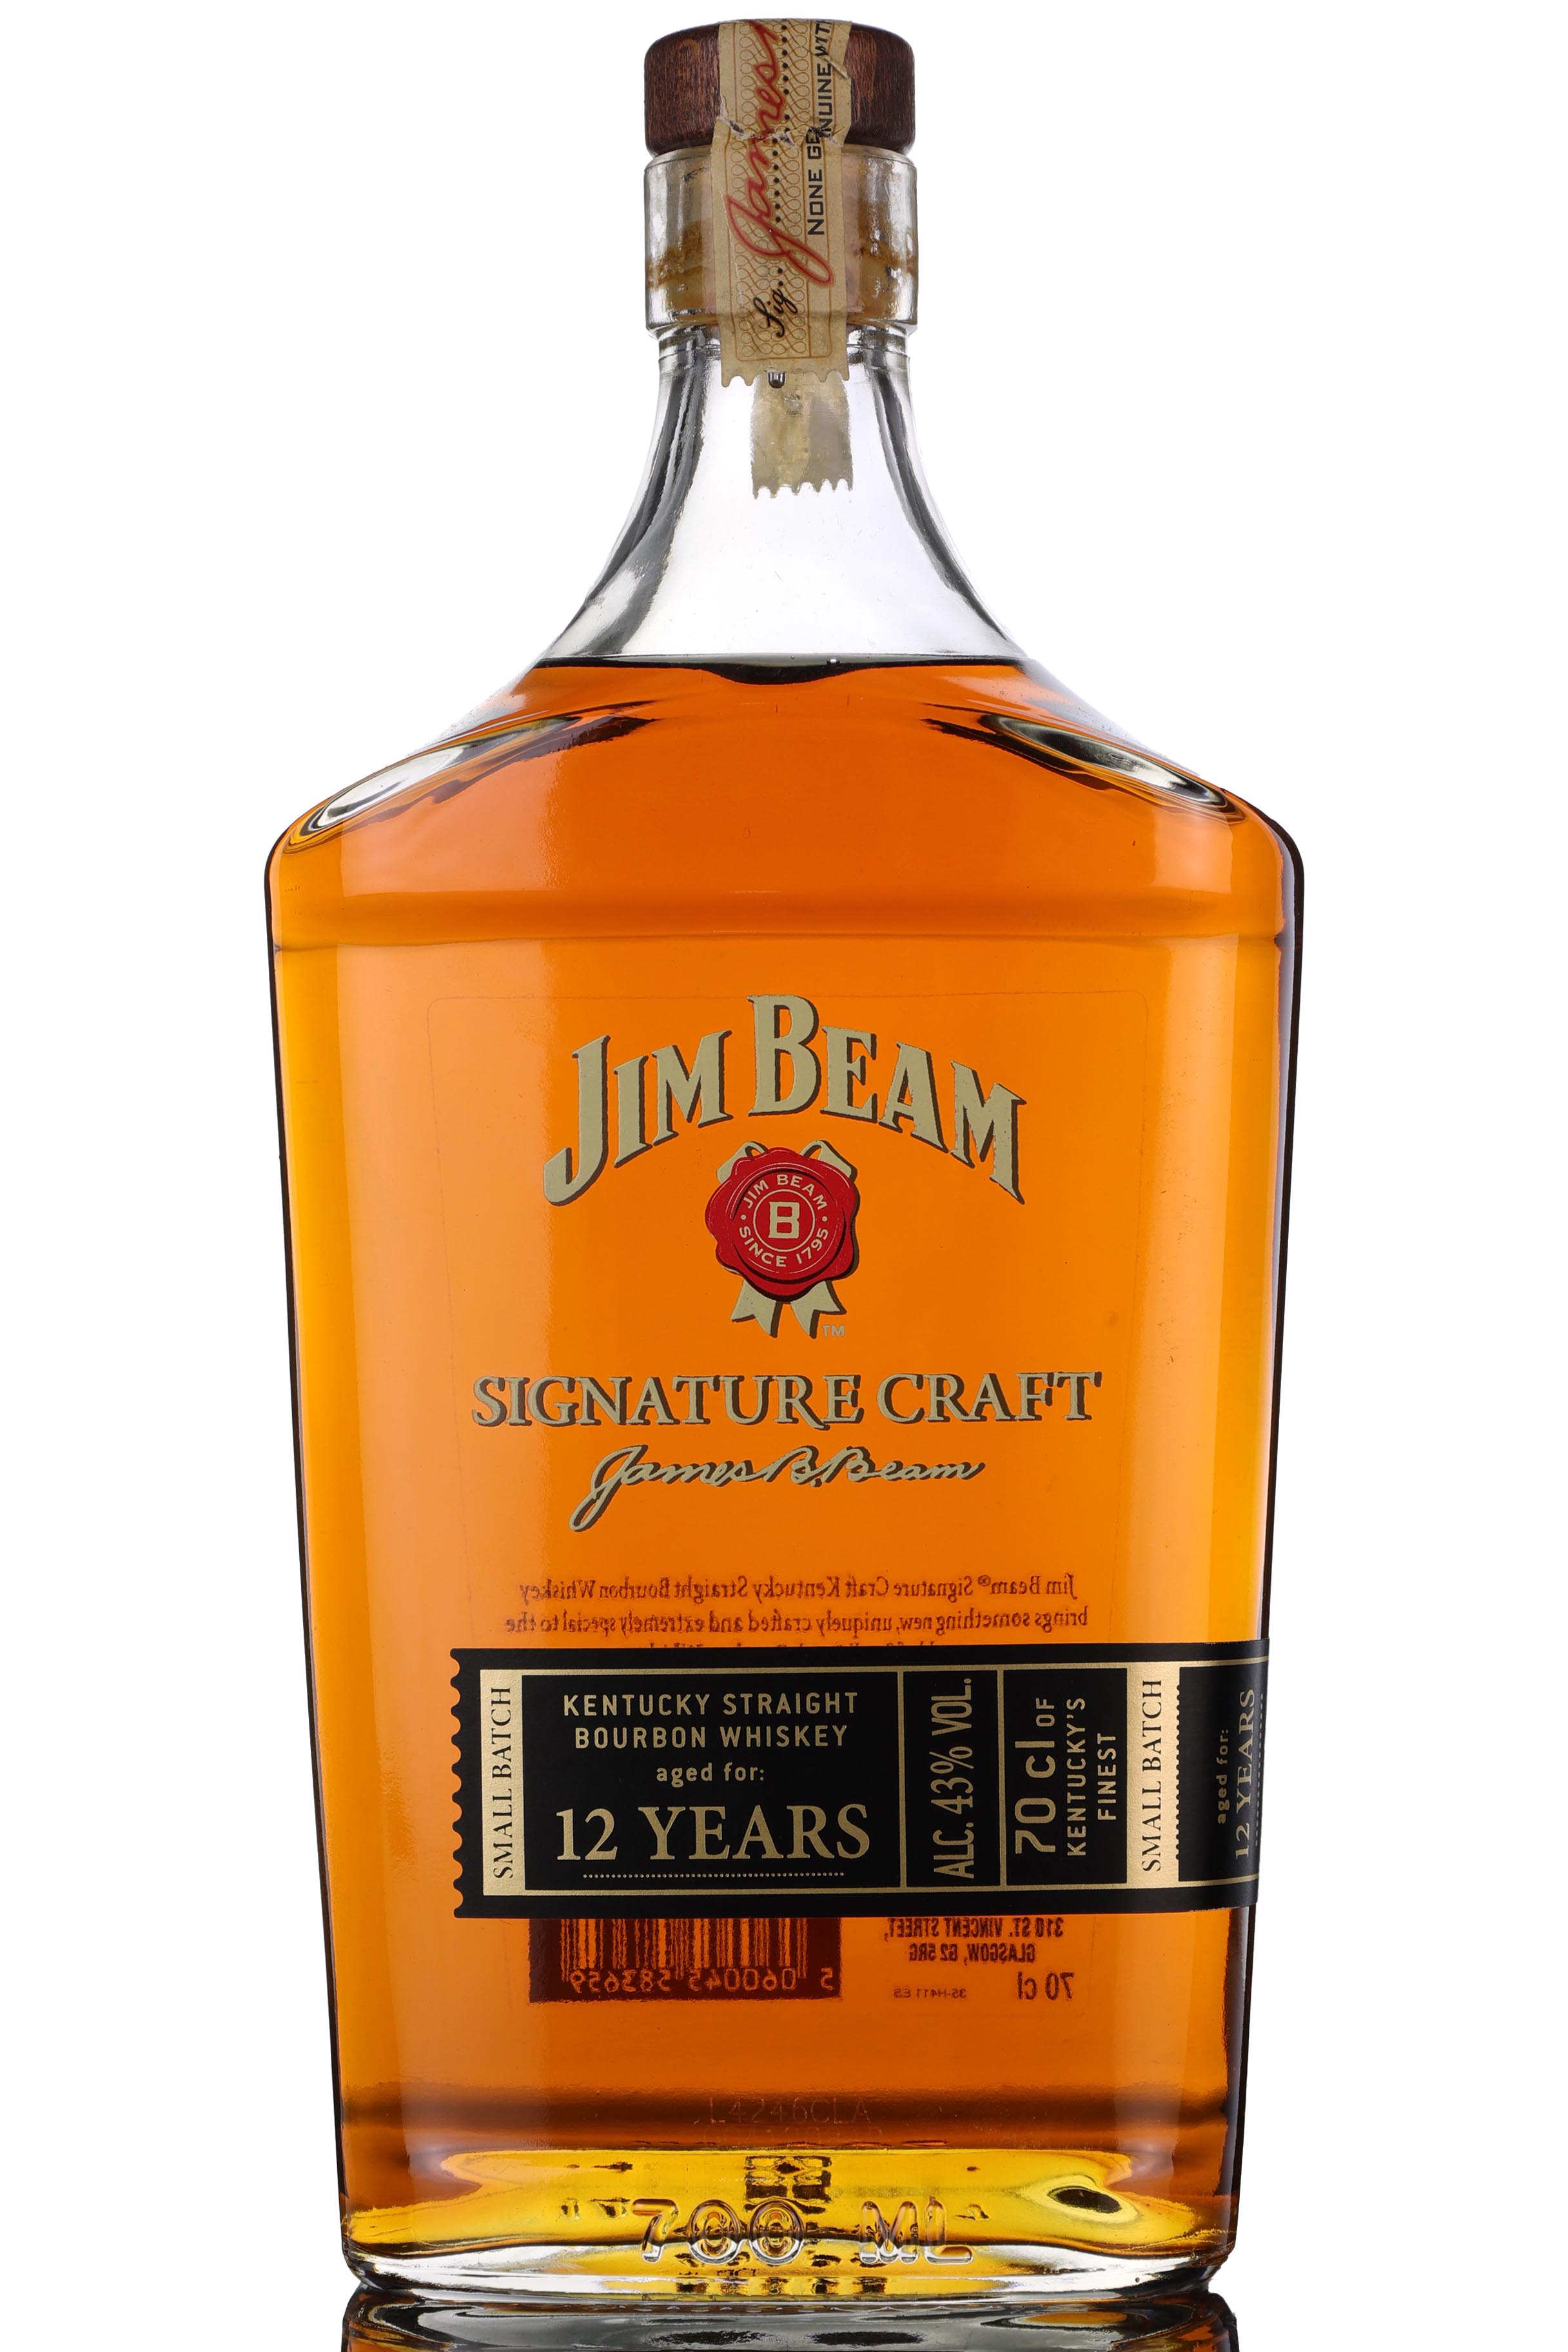 Jim Beam 12 Year Old - Signature Craft - Small Batch - 2014 Release